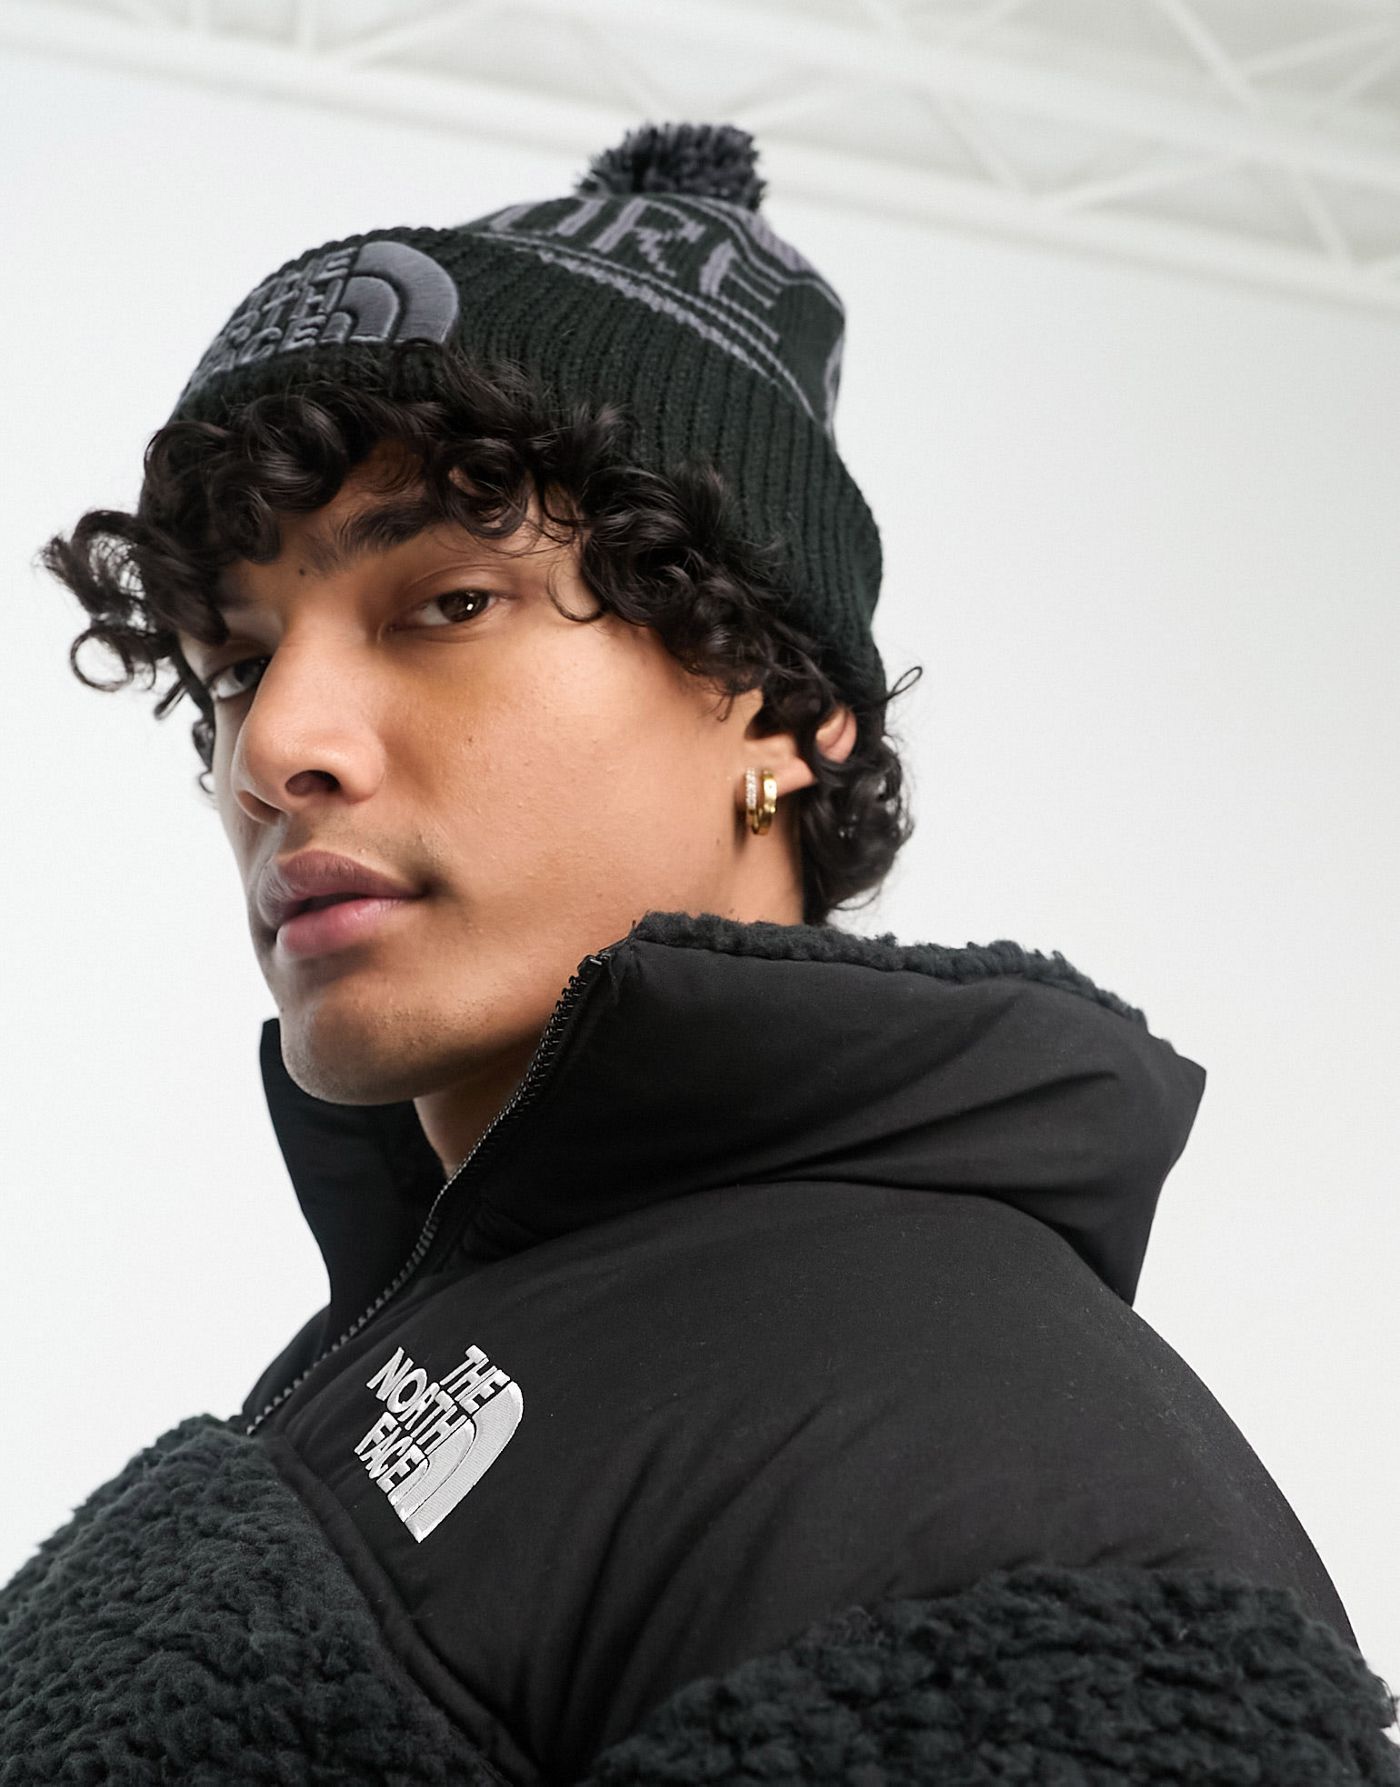 The North Face Retro bobble hat in black and grey